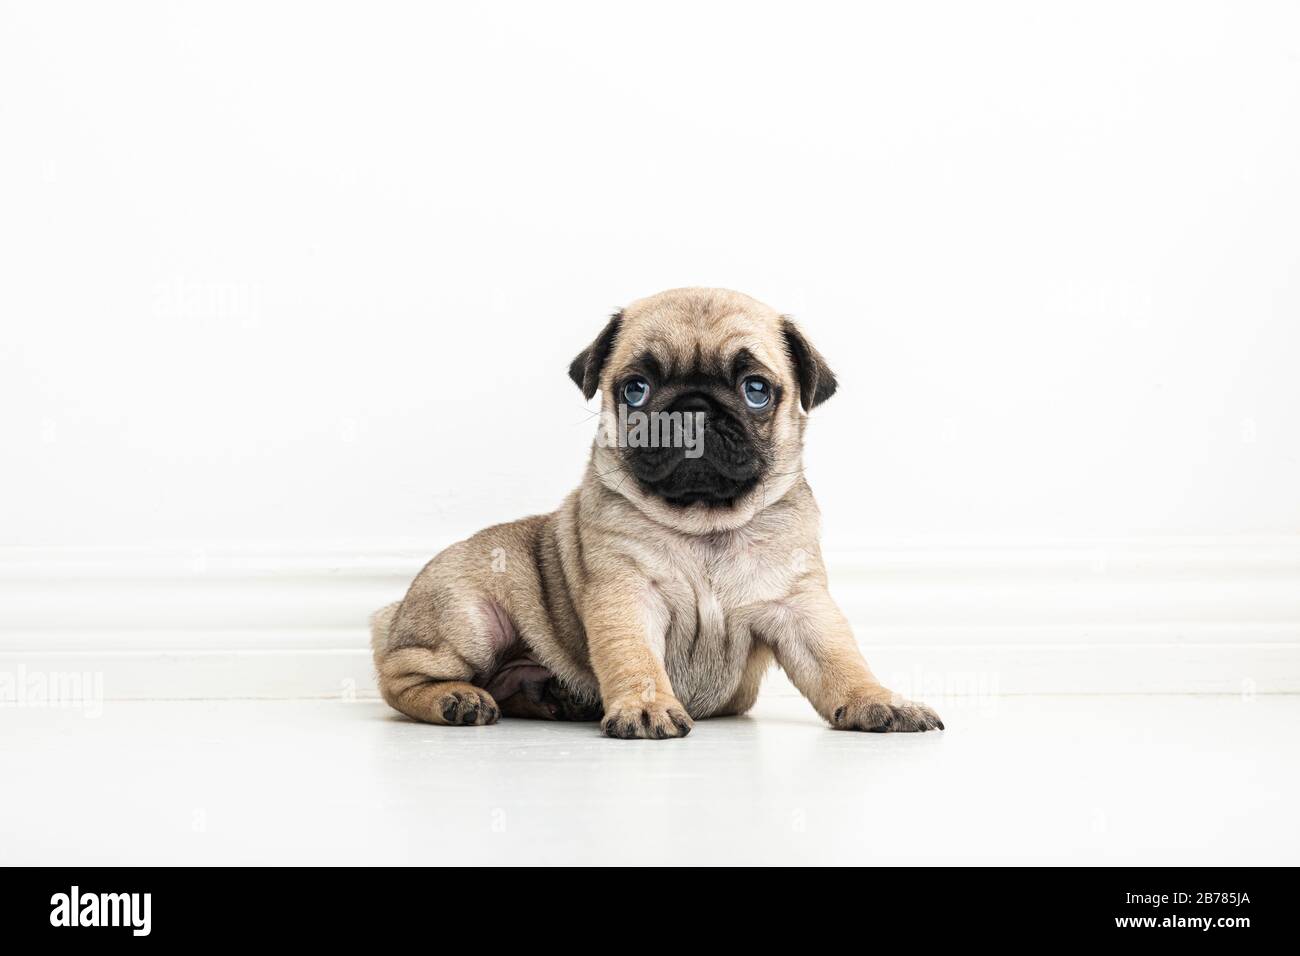 A six weeks old adorable purebred Pug puppy on a white background. The cute young pup is looking at camera. Stock Photo